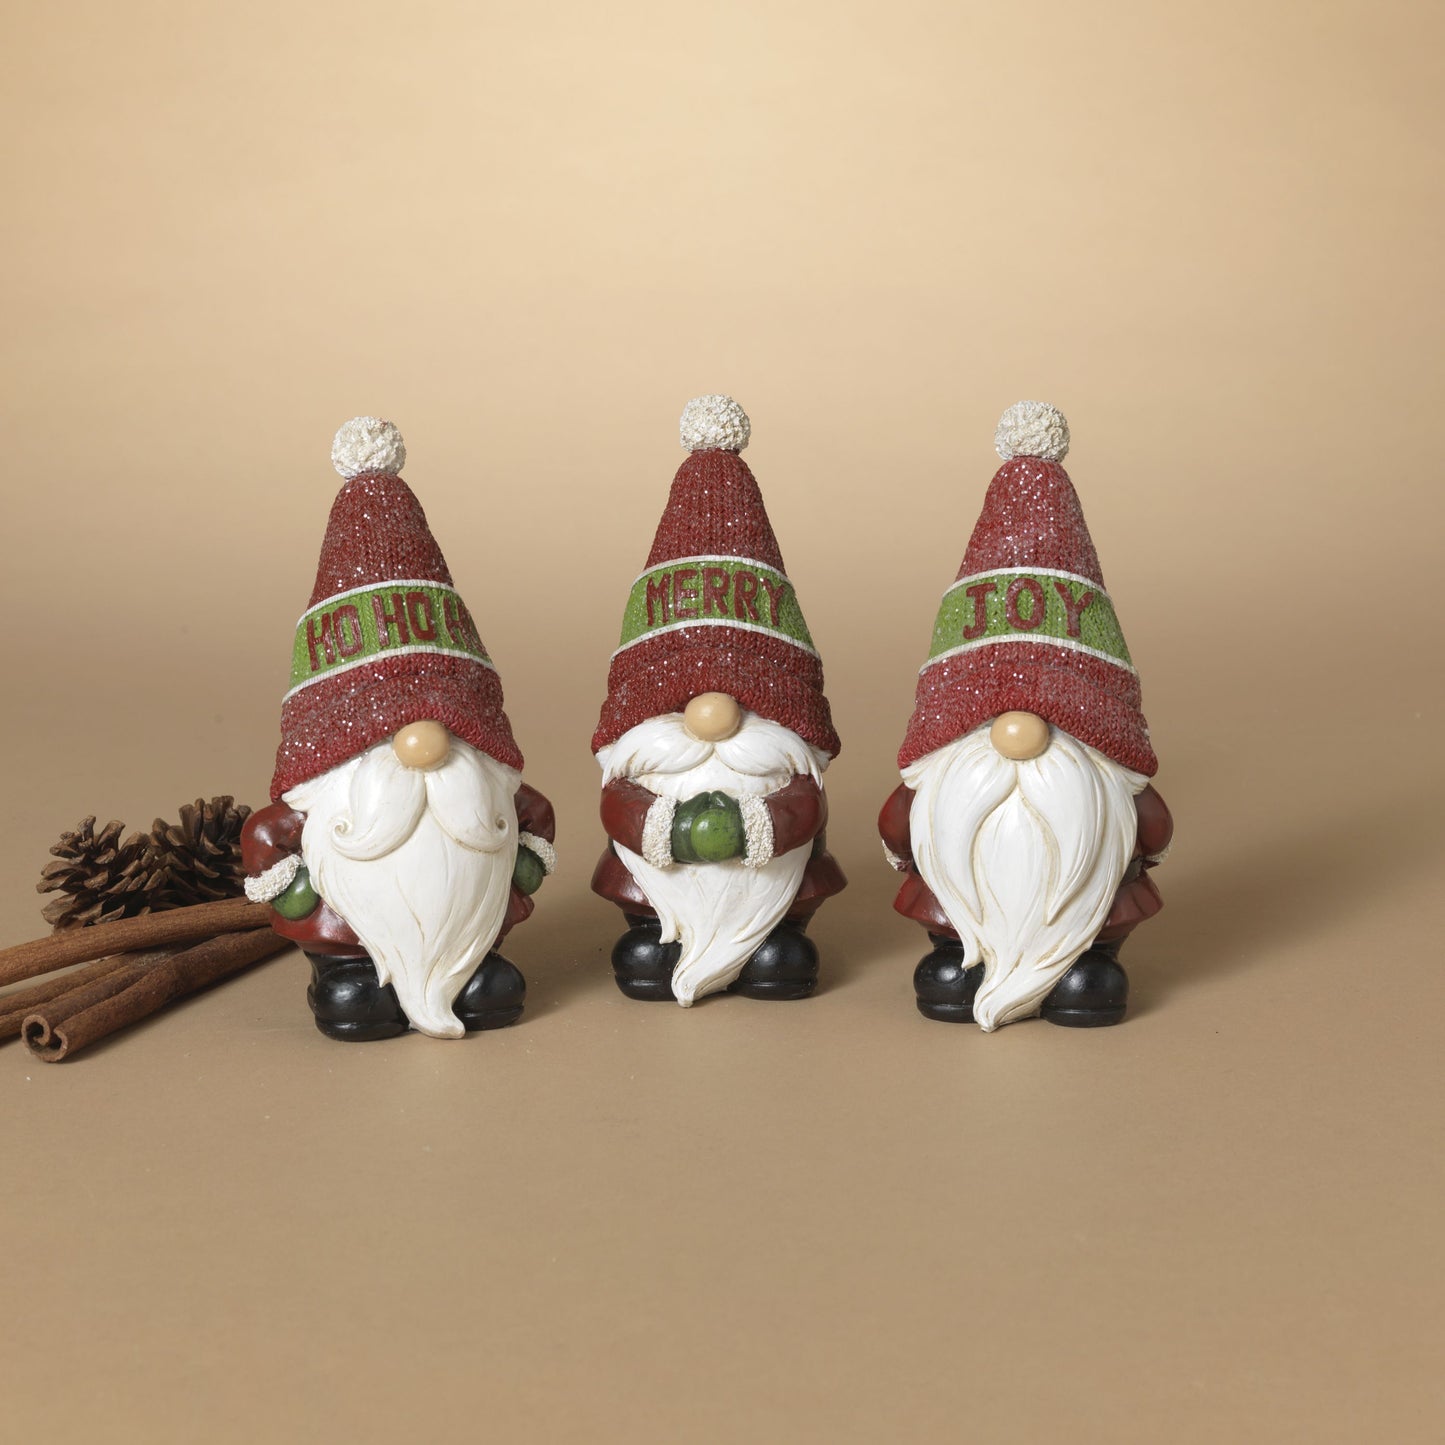 Gerson Company 6.3"H Resin Holiday Gnome, 3 Asst